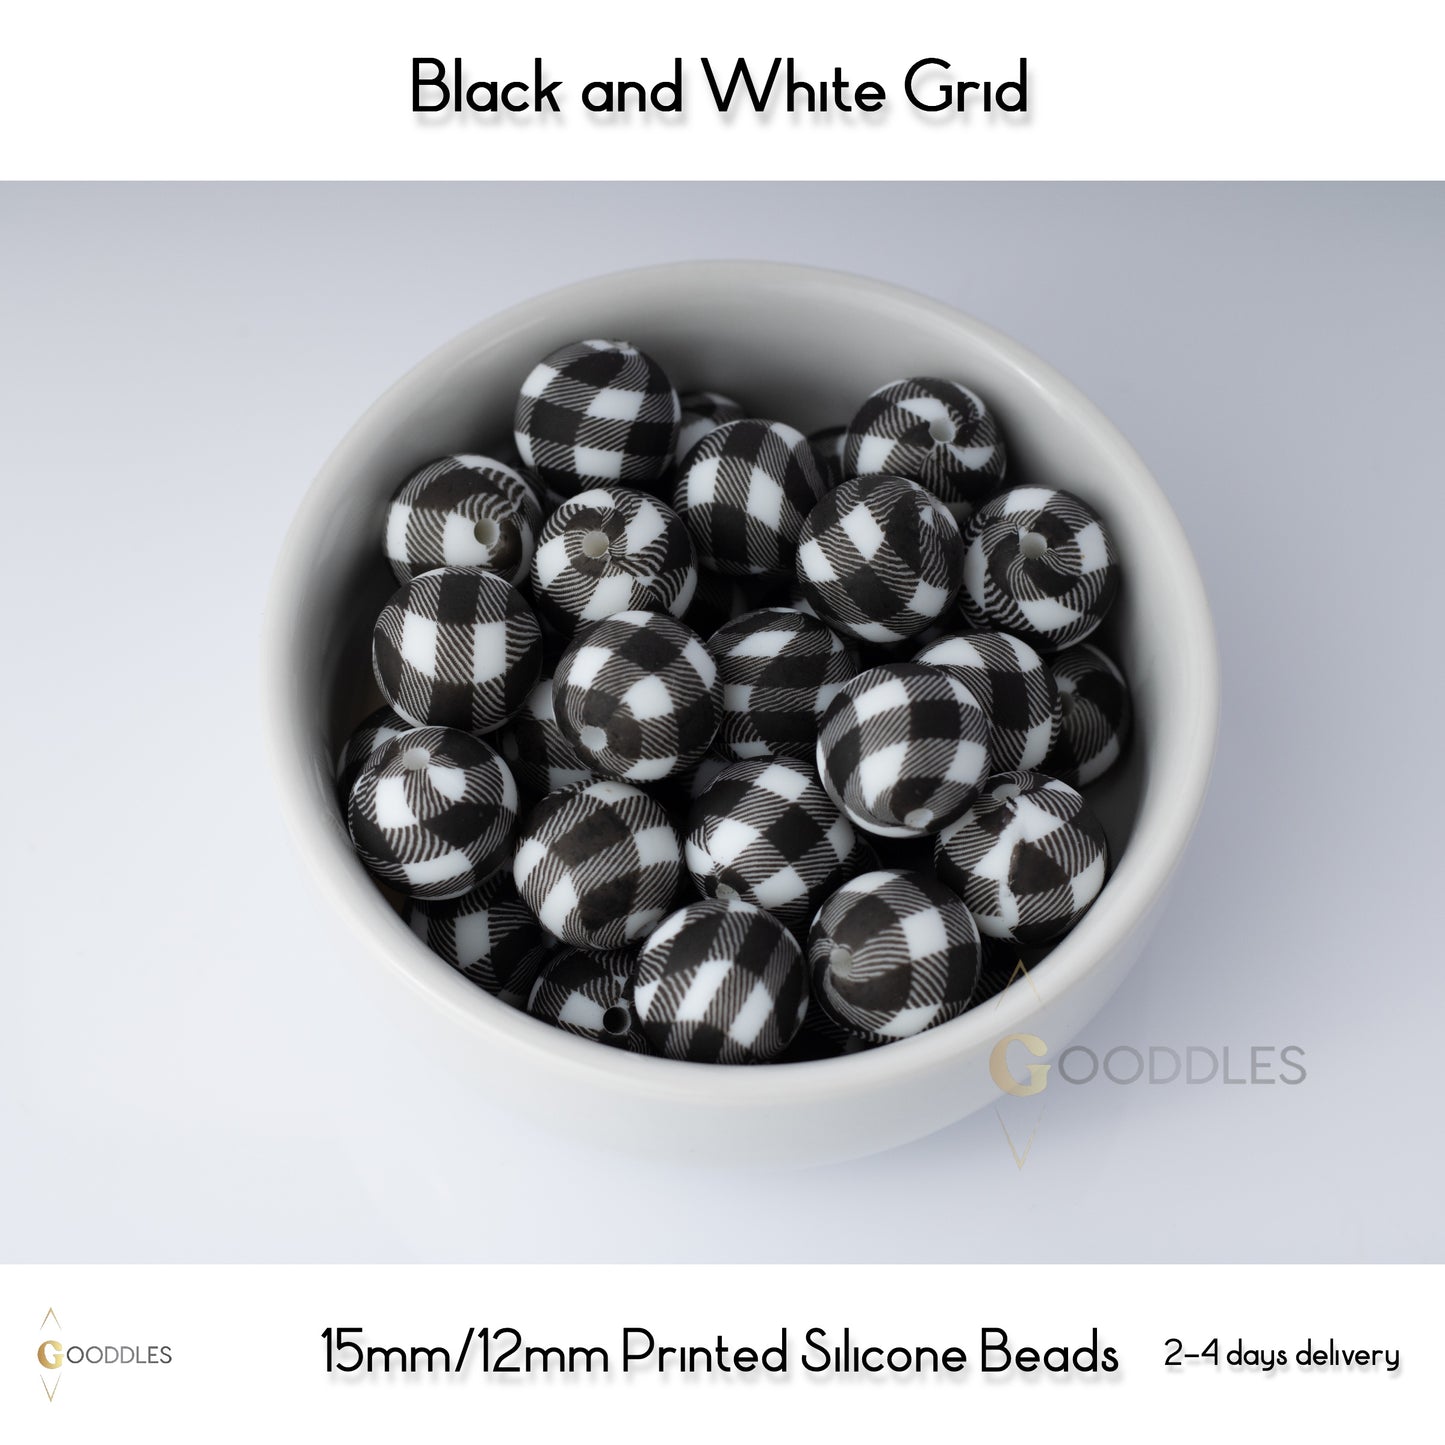 5pcs, Black and White Grid Silicone Beads Printed Round Silicone Beads